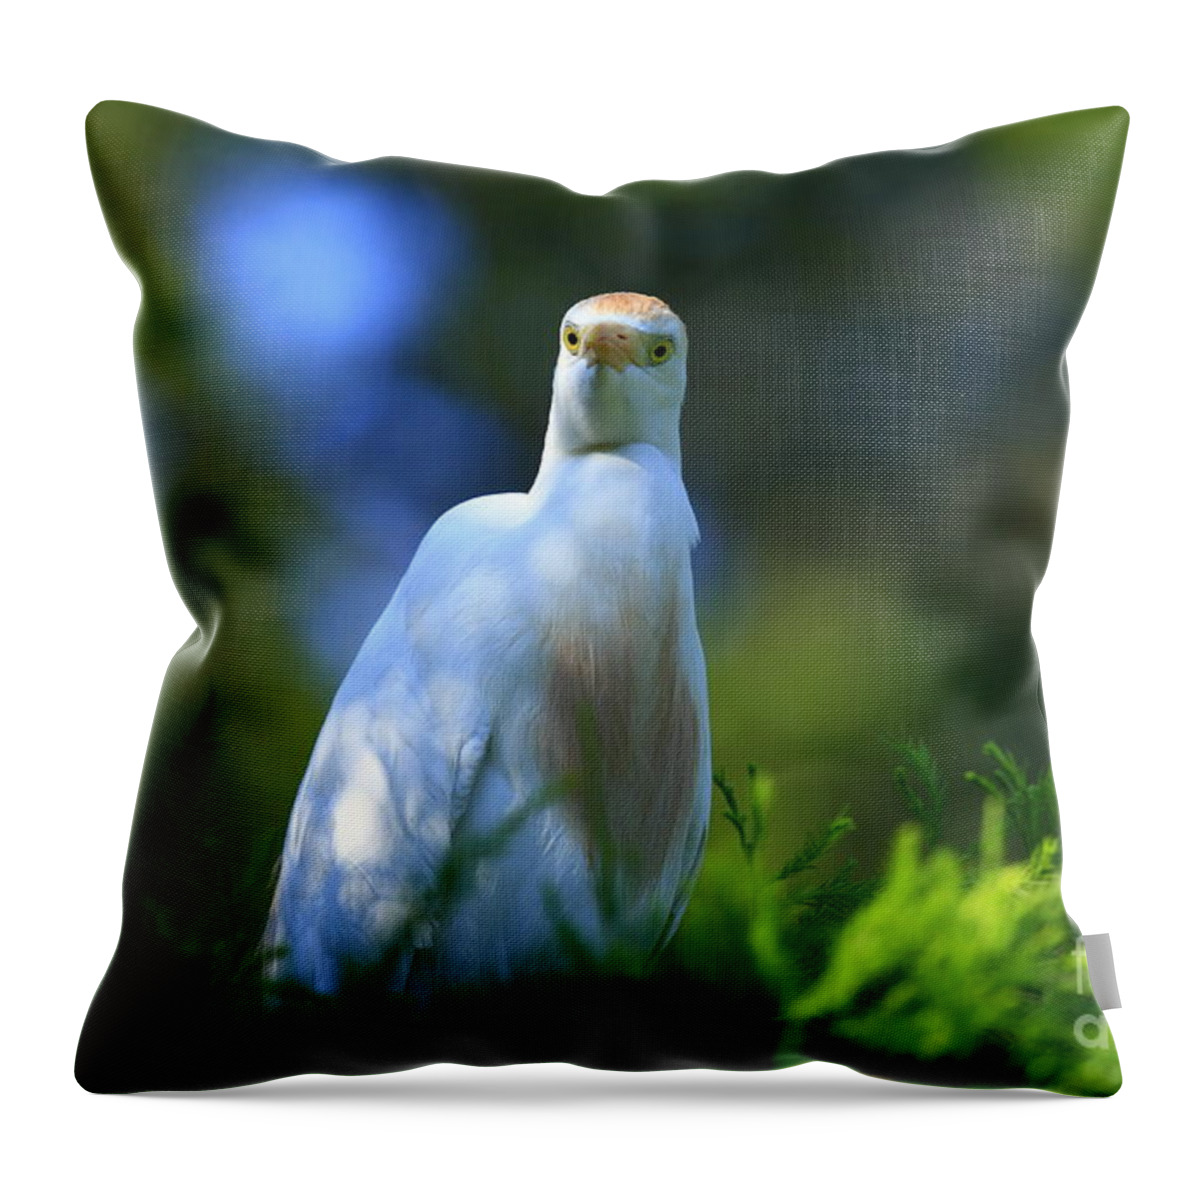 Animals Throw Pillow featuring the photograph Cattle Egret Eyes by John F Tsumas